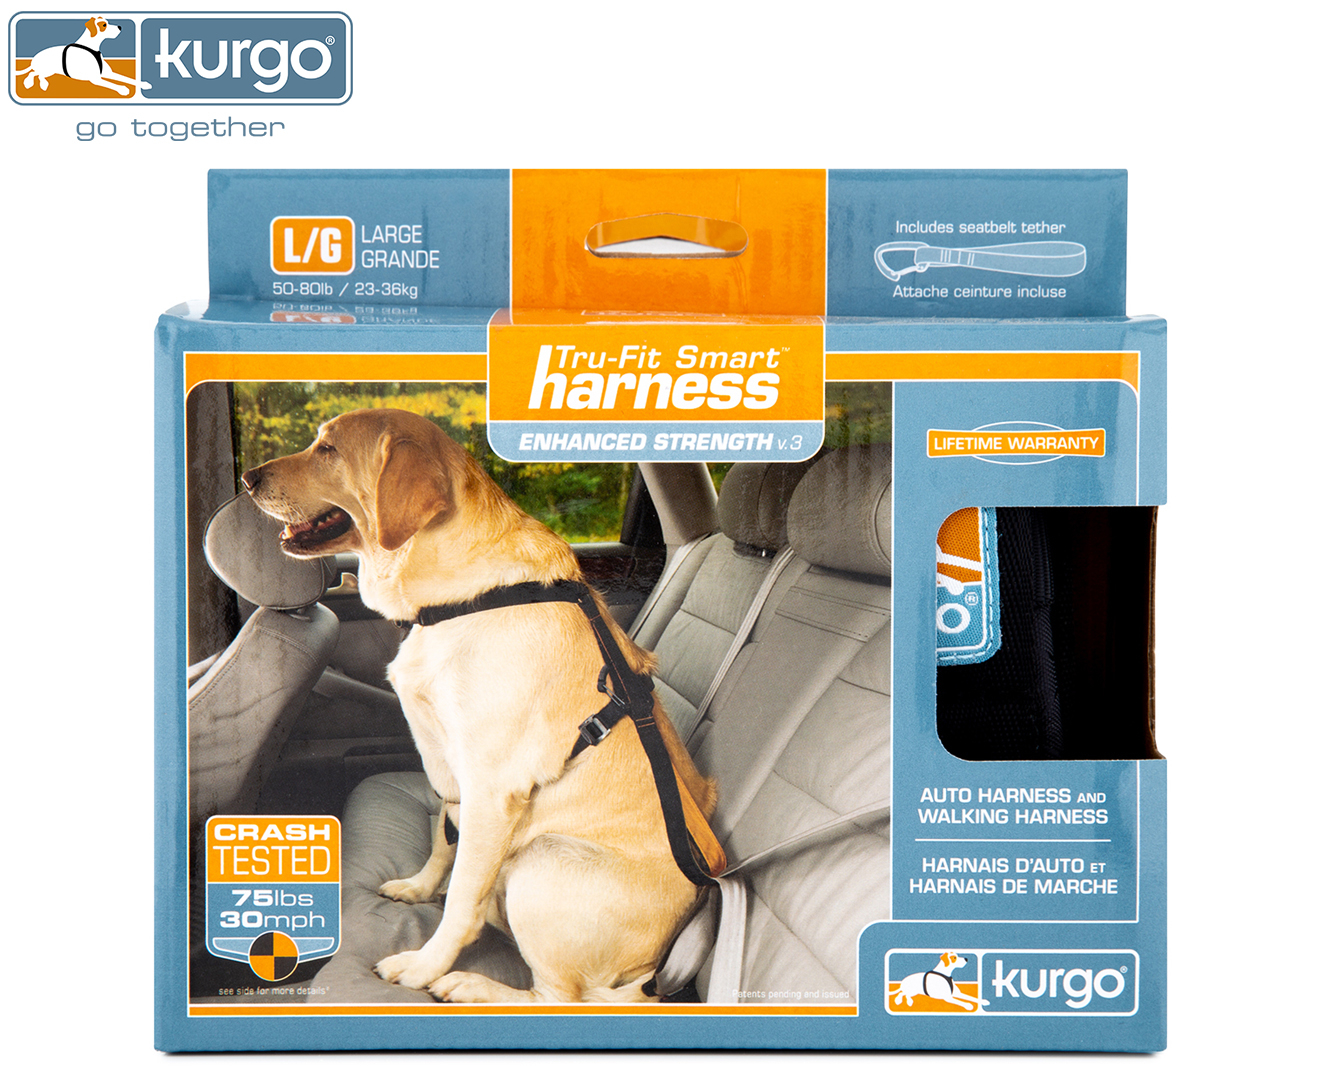 Everyday Dog Hiking Harness Includes Dog Seatbelt Tether for Restraint Go-Tech Harness Kurgo Running Harness for Dogs Control Handle Small Medium Large Pets Reflective Pet Walking Harness 